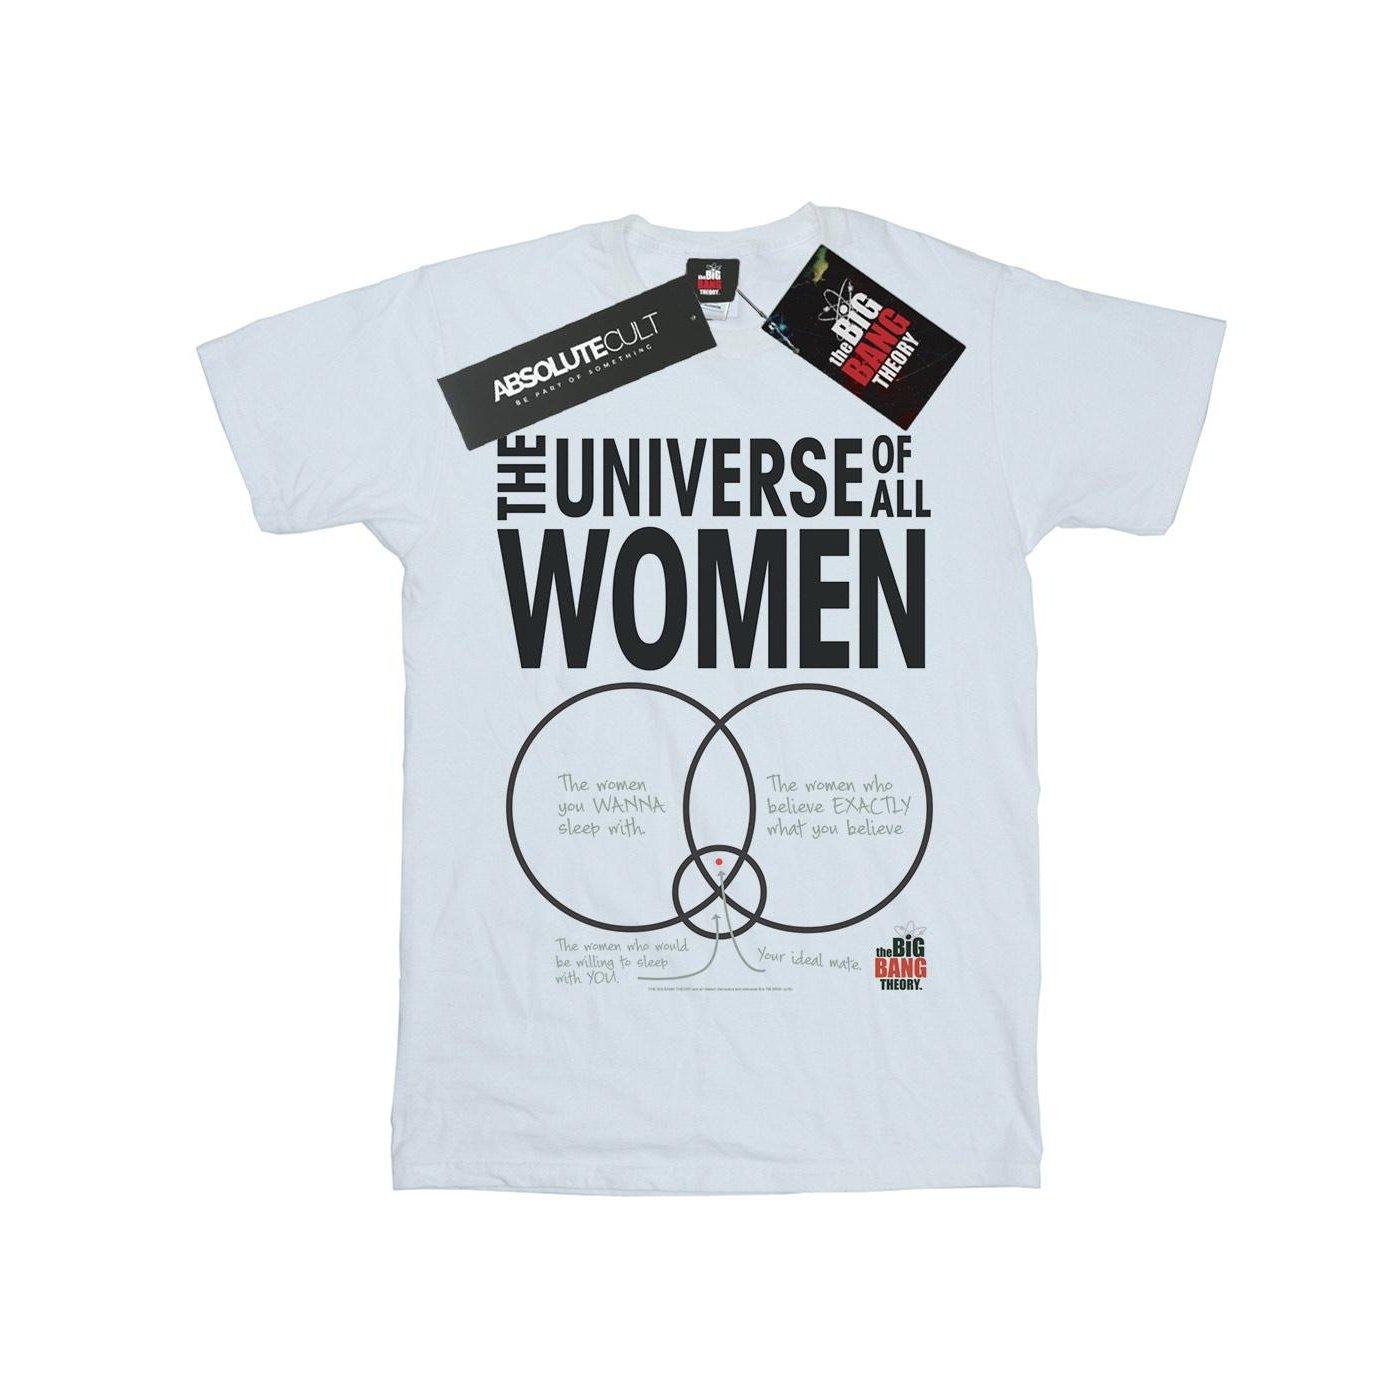 The Universe Of All Women Tshirt Herren Weiss S von The Big Bang Theory